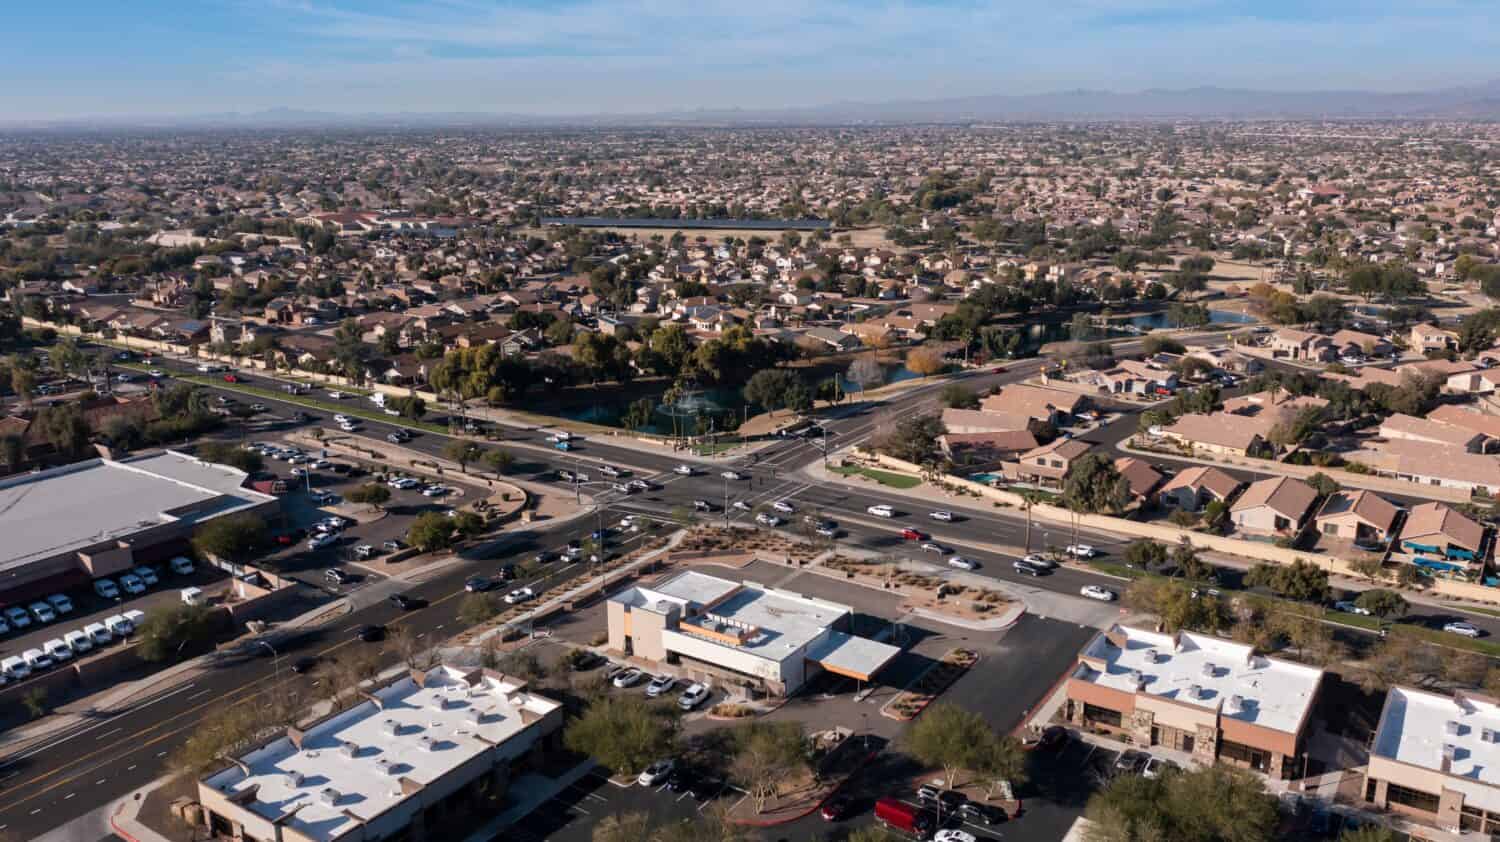 Afternoon aerial view of dense urban core of Surprise, Arizona, USA.